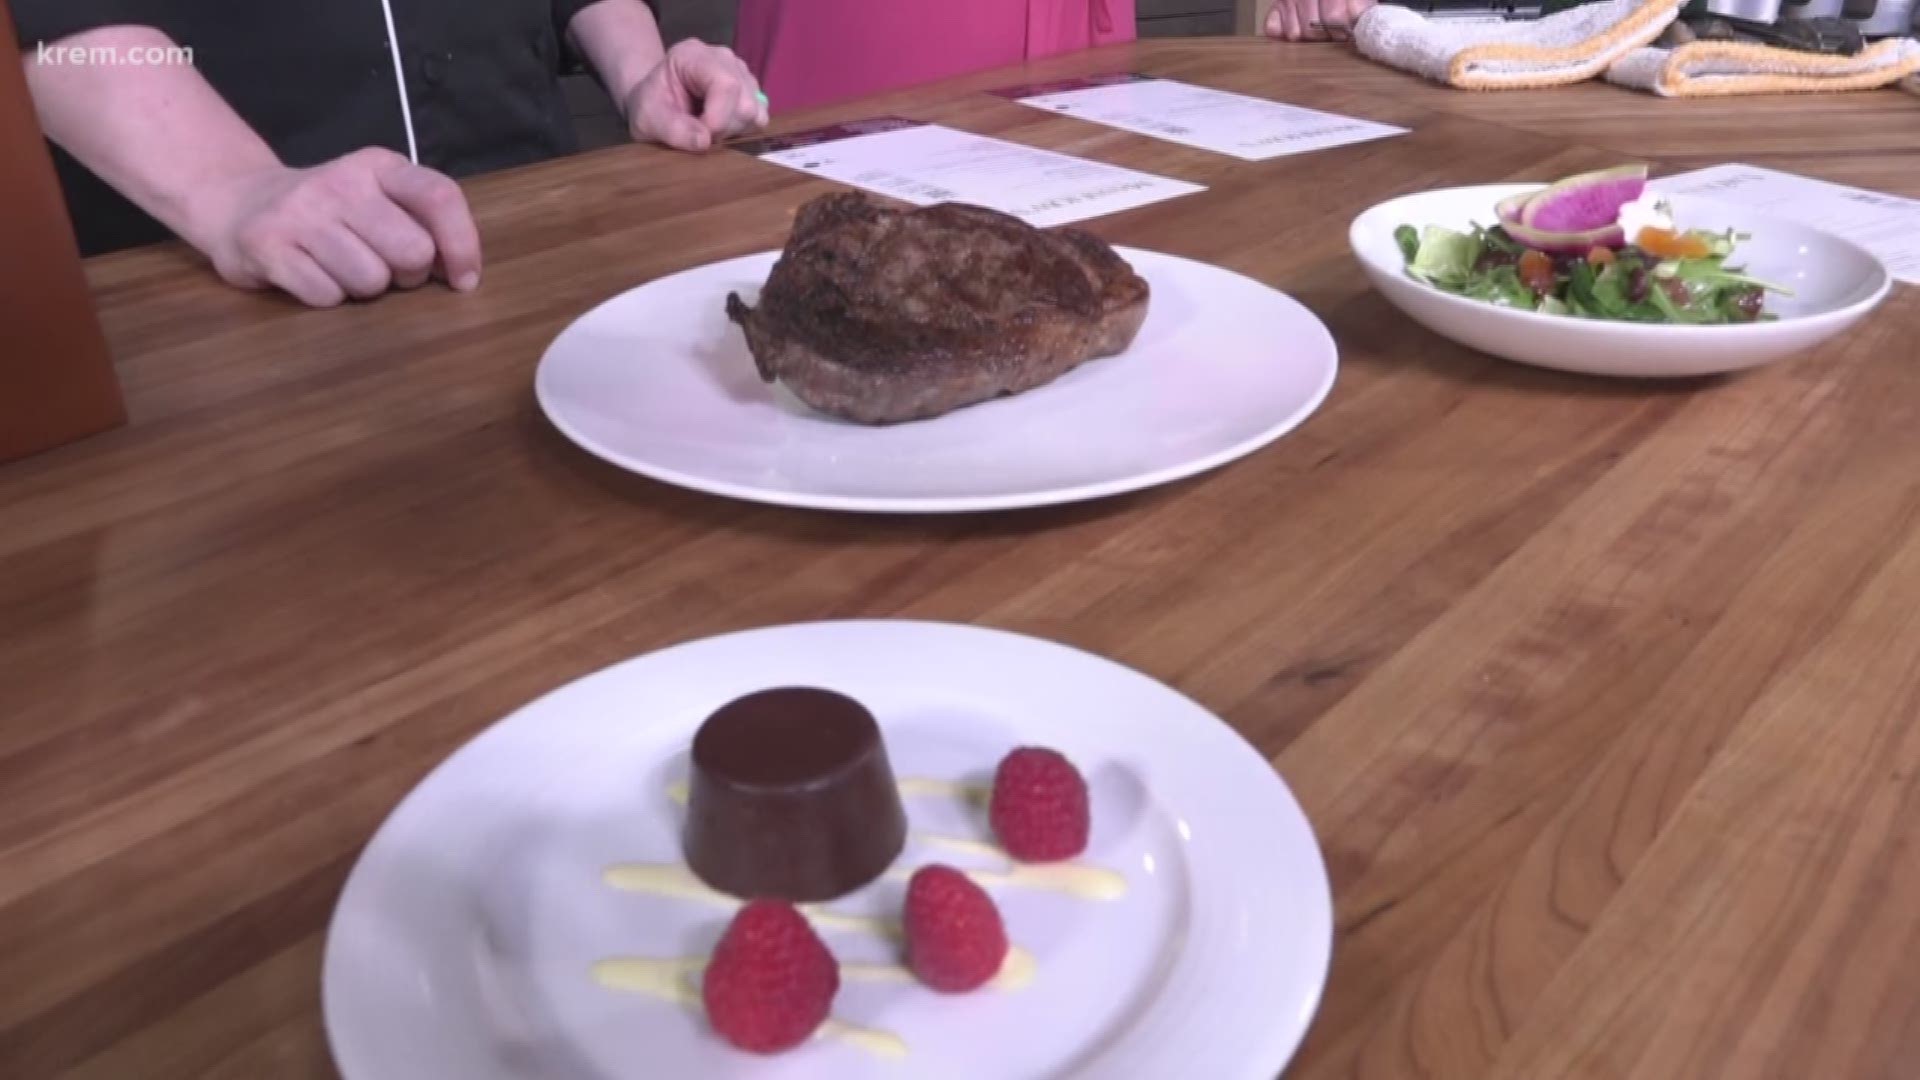 KREM's Brittany Bailey and Jen York chat with Masselow's Chef Tanya Broesder about the restuarant's offers for the food festivities.